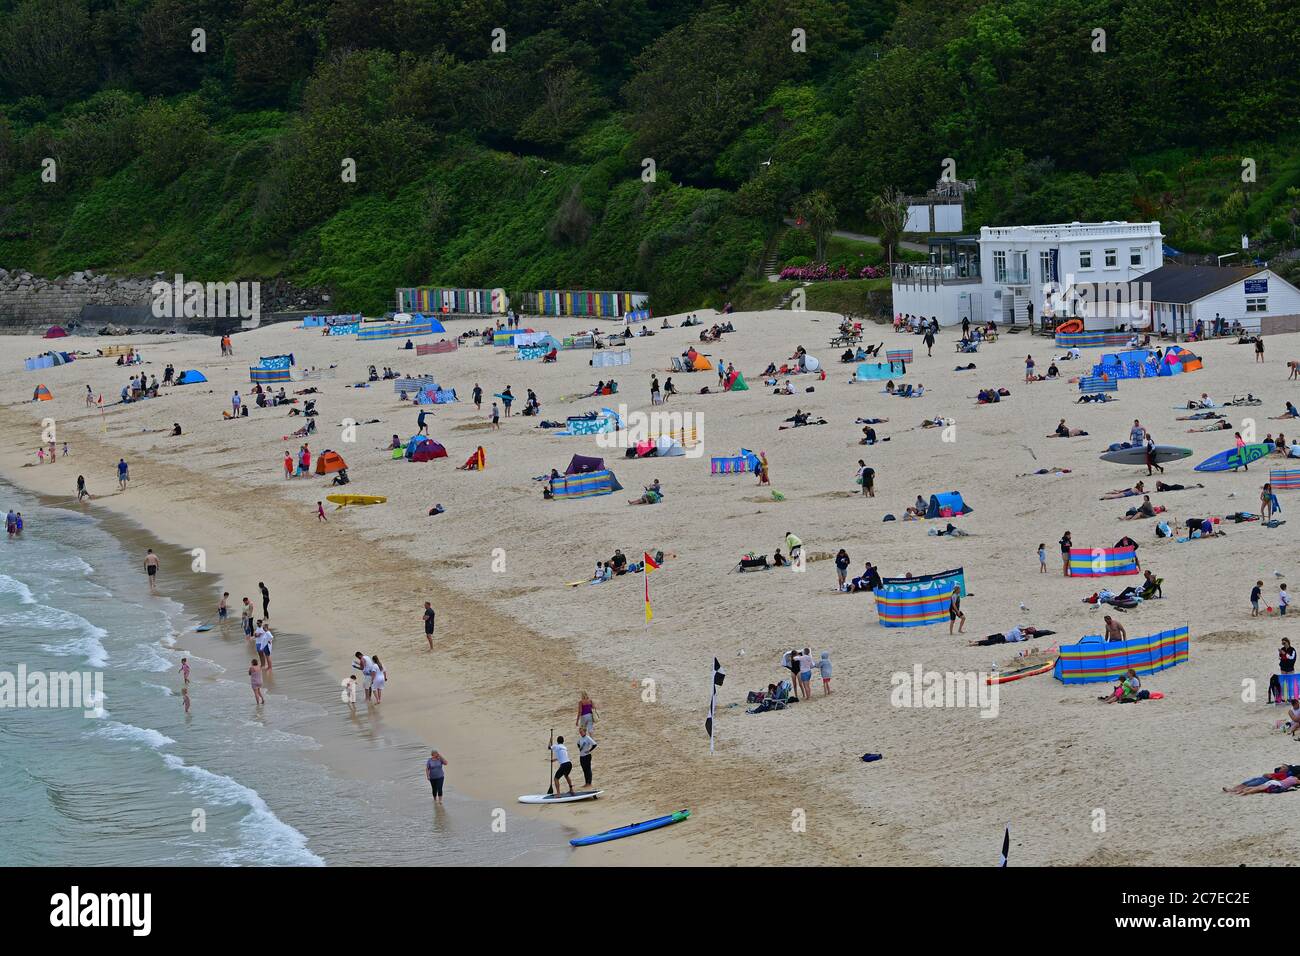 St Ives, UK. 16th July, 2020. 16th July 2020.Lazy afternoon on a Packed beach in, Carbis Bay, Cornwall on a hot afternoon. World Leaders will hold a G7 meeting here Next Year July 2021.Picture Credit: Robert Timoney/Alamy Live News Stock Photo